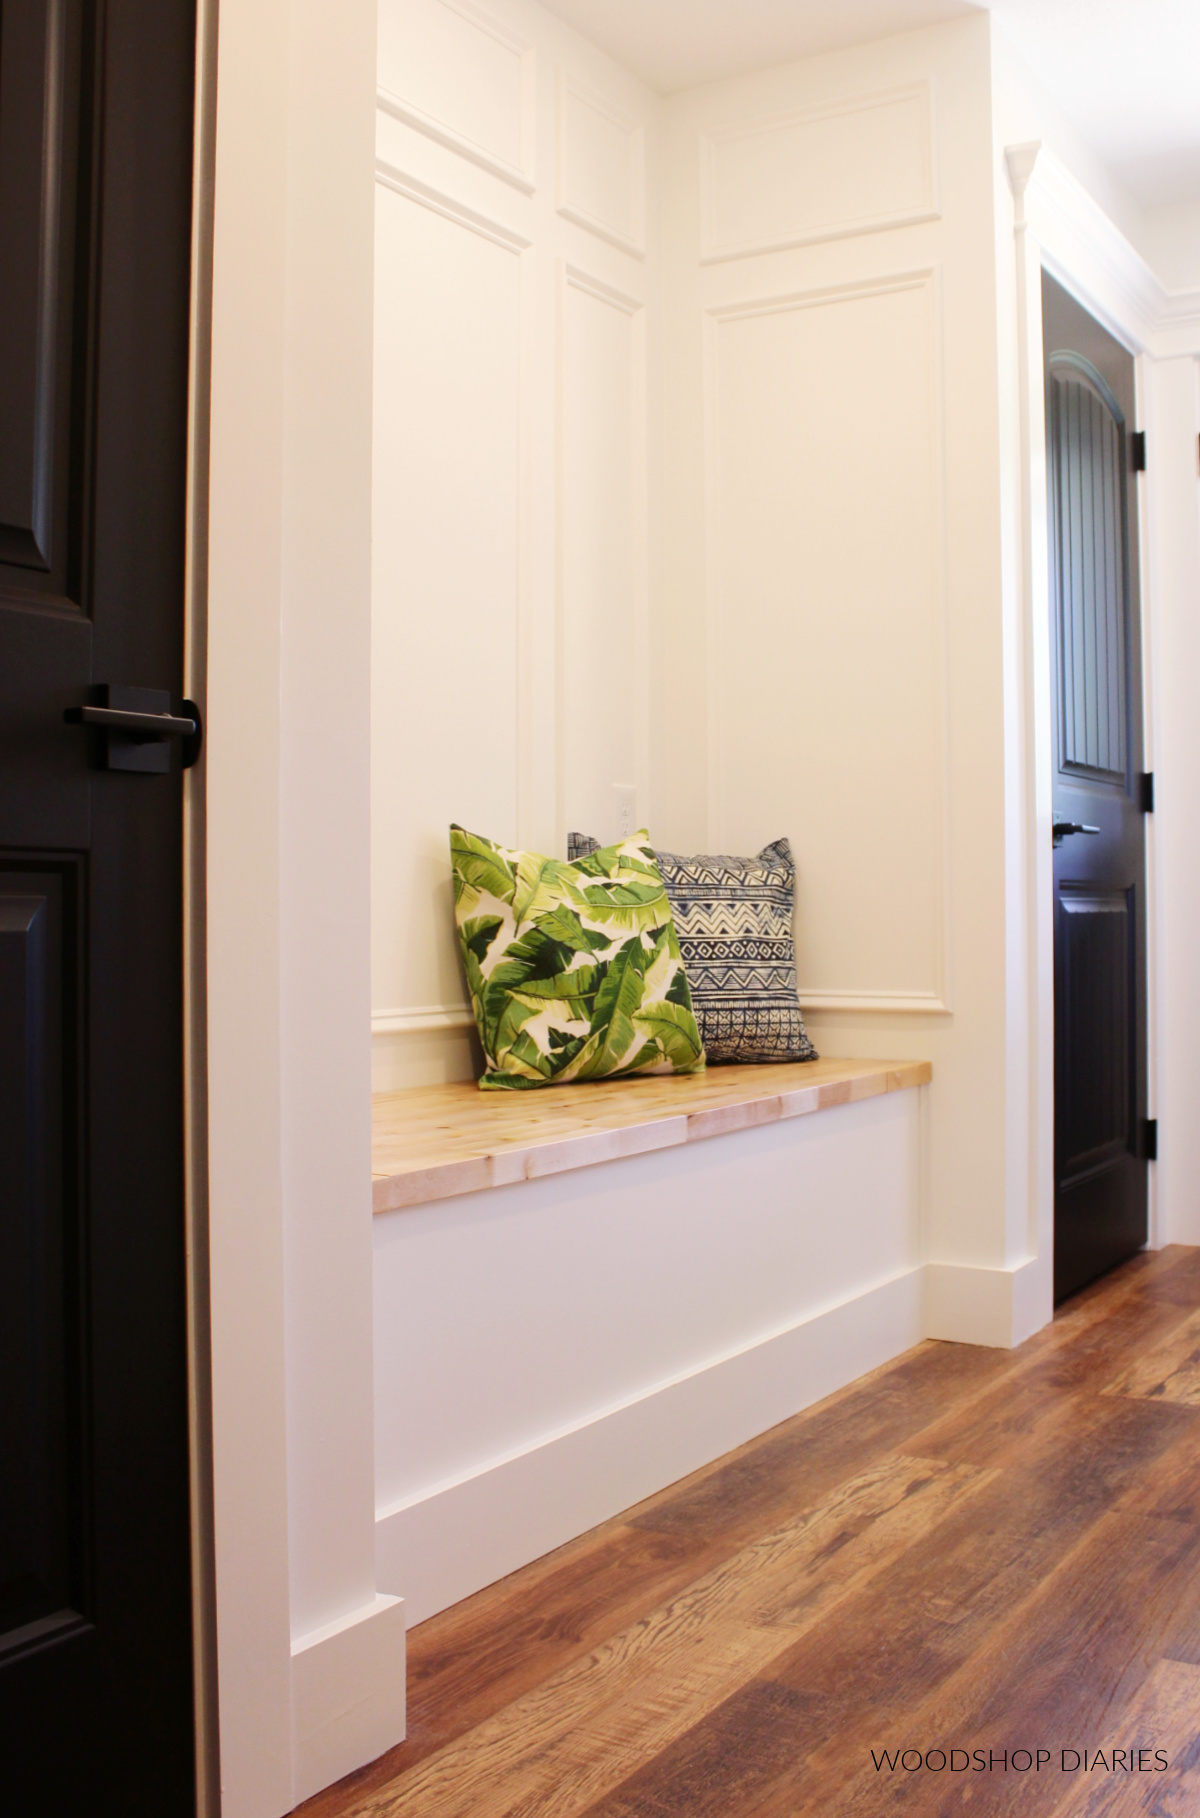 Built in bench seat in hallway between two closets with black doors and base cap molding on walls